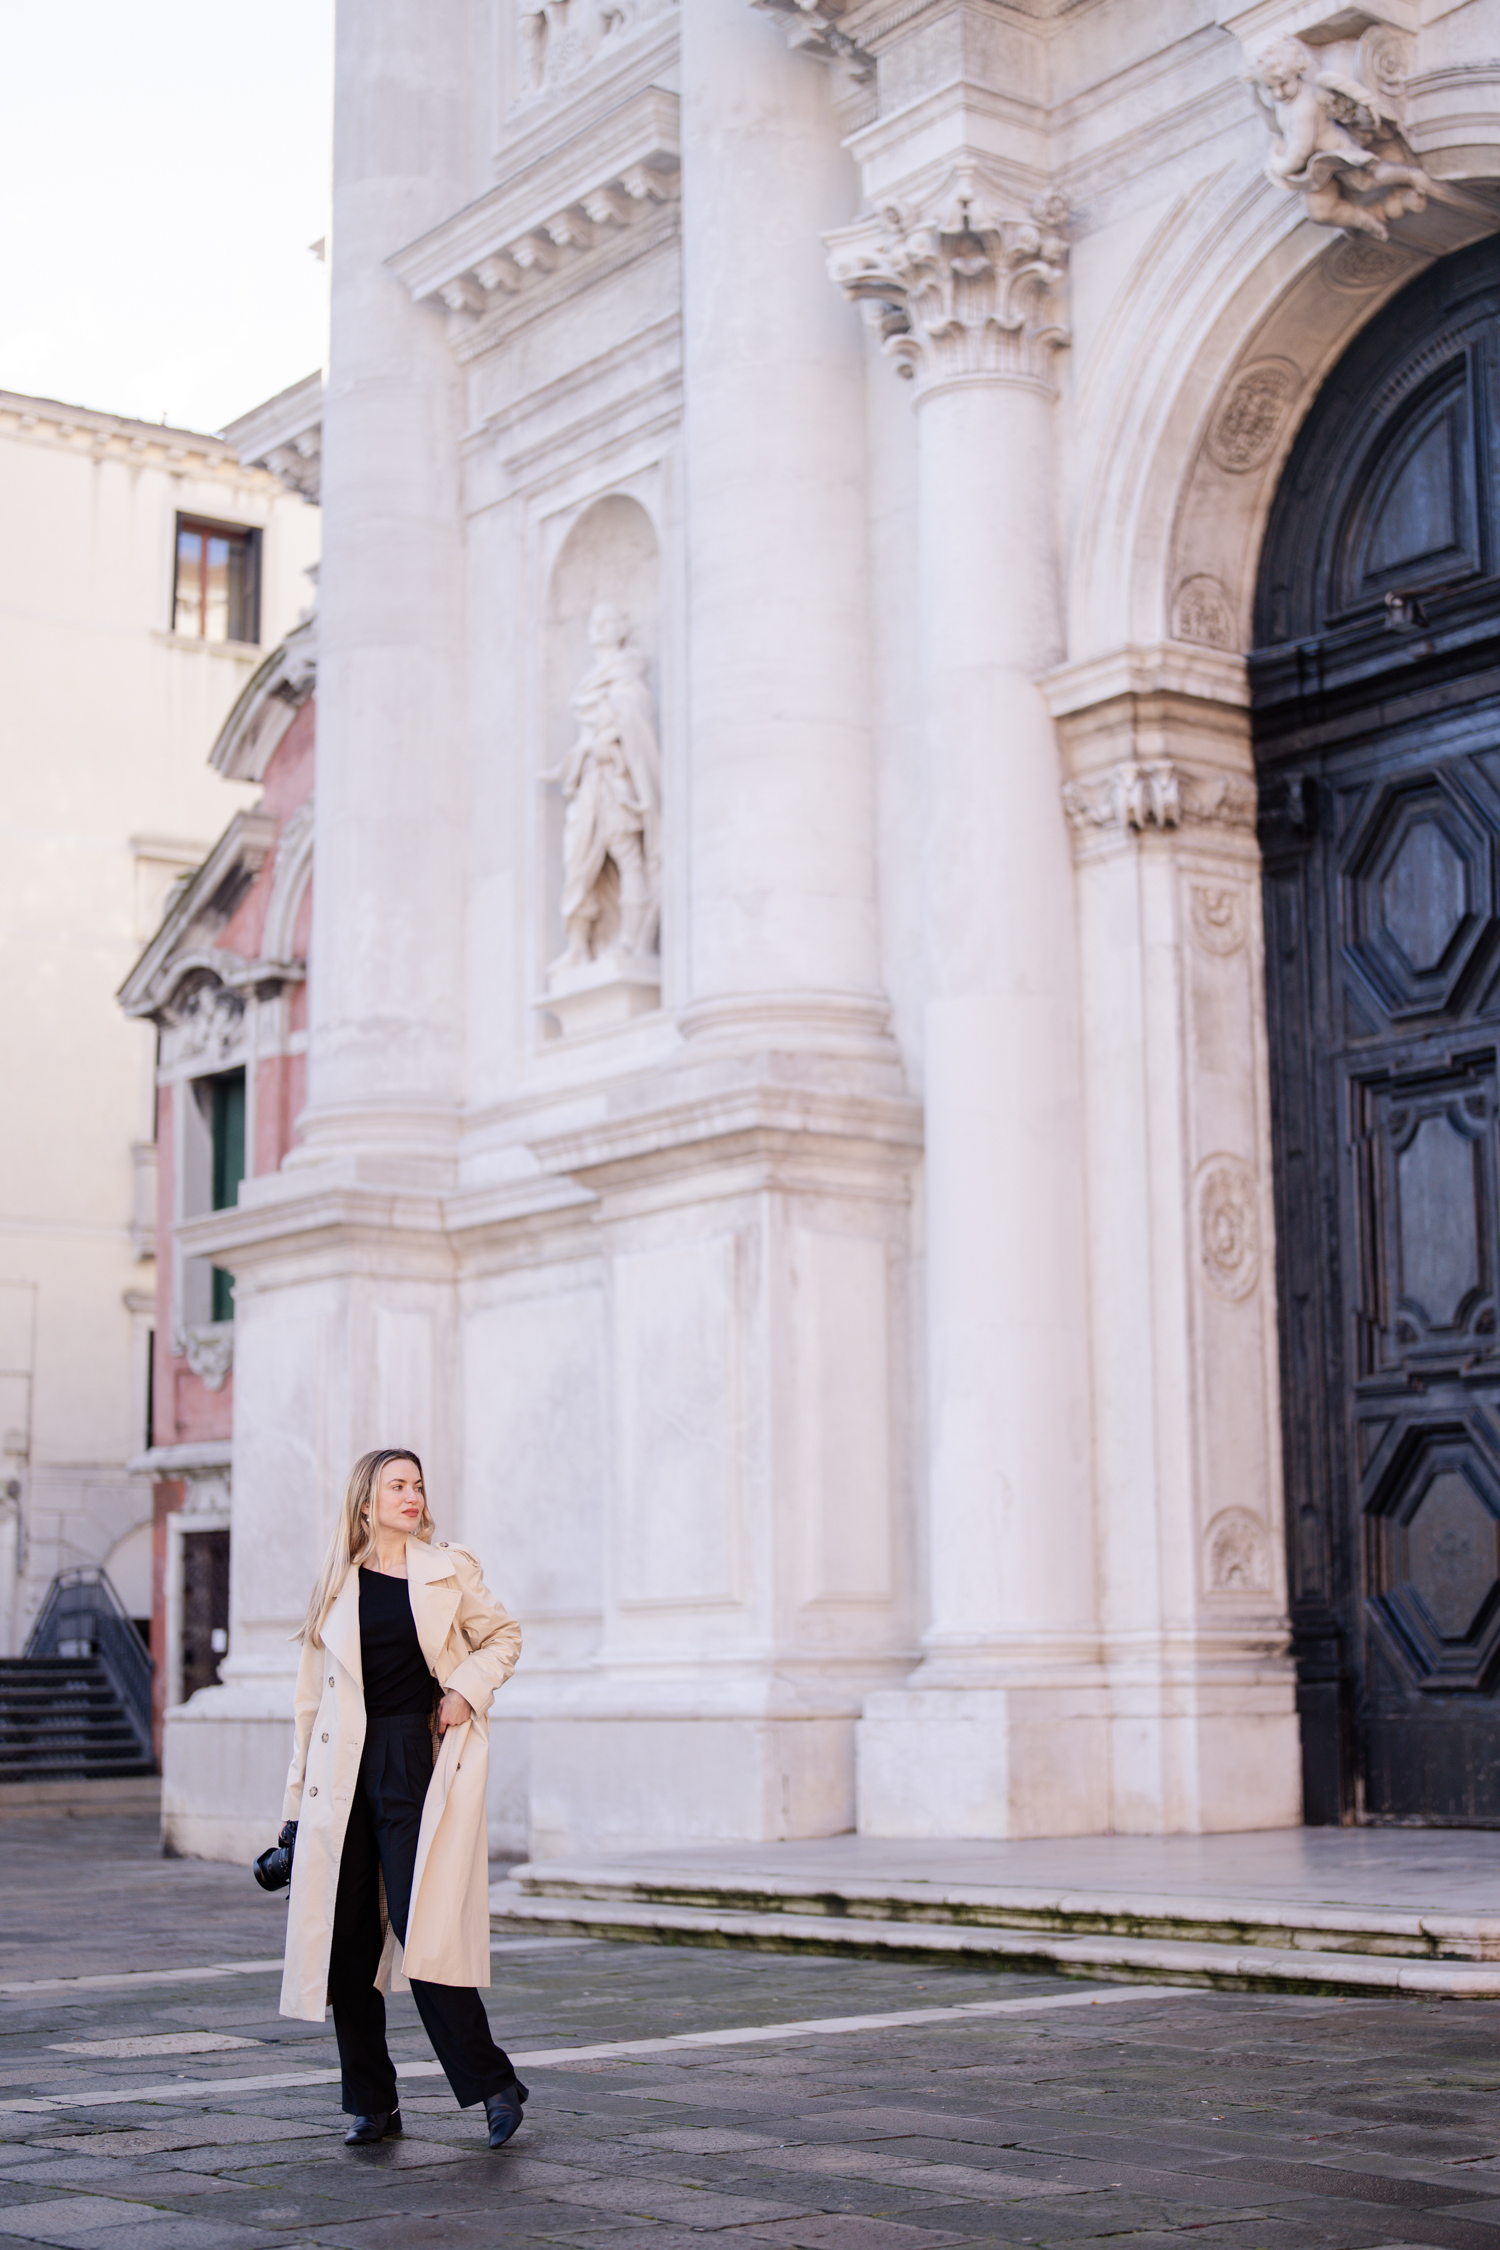 How to dress for a photoshoot in Venice? Tips from a professional Venice photographer